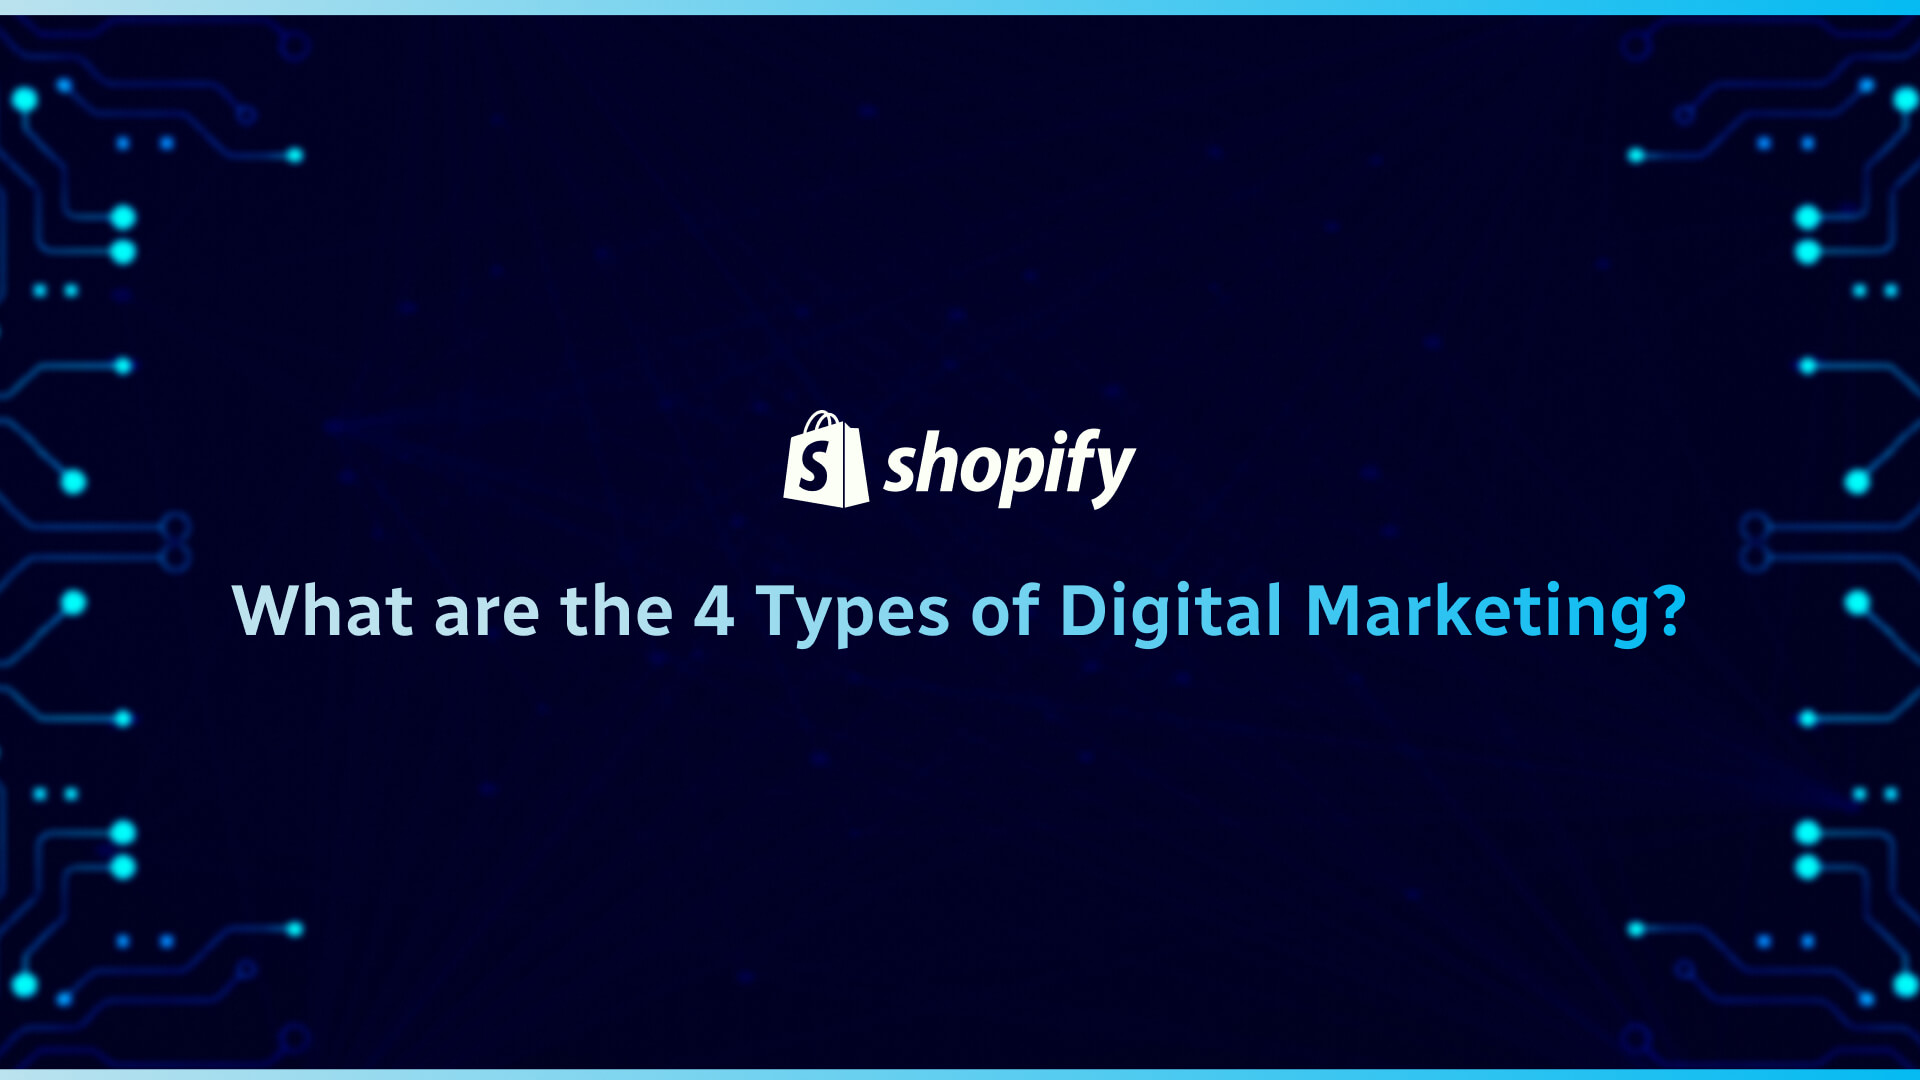 What are the 4 Types of Digital Marketing?